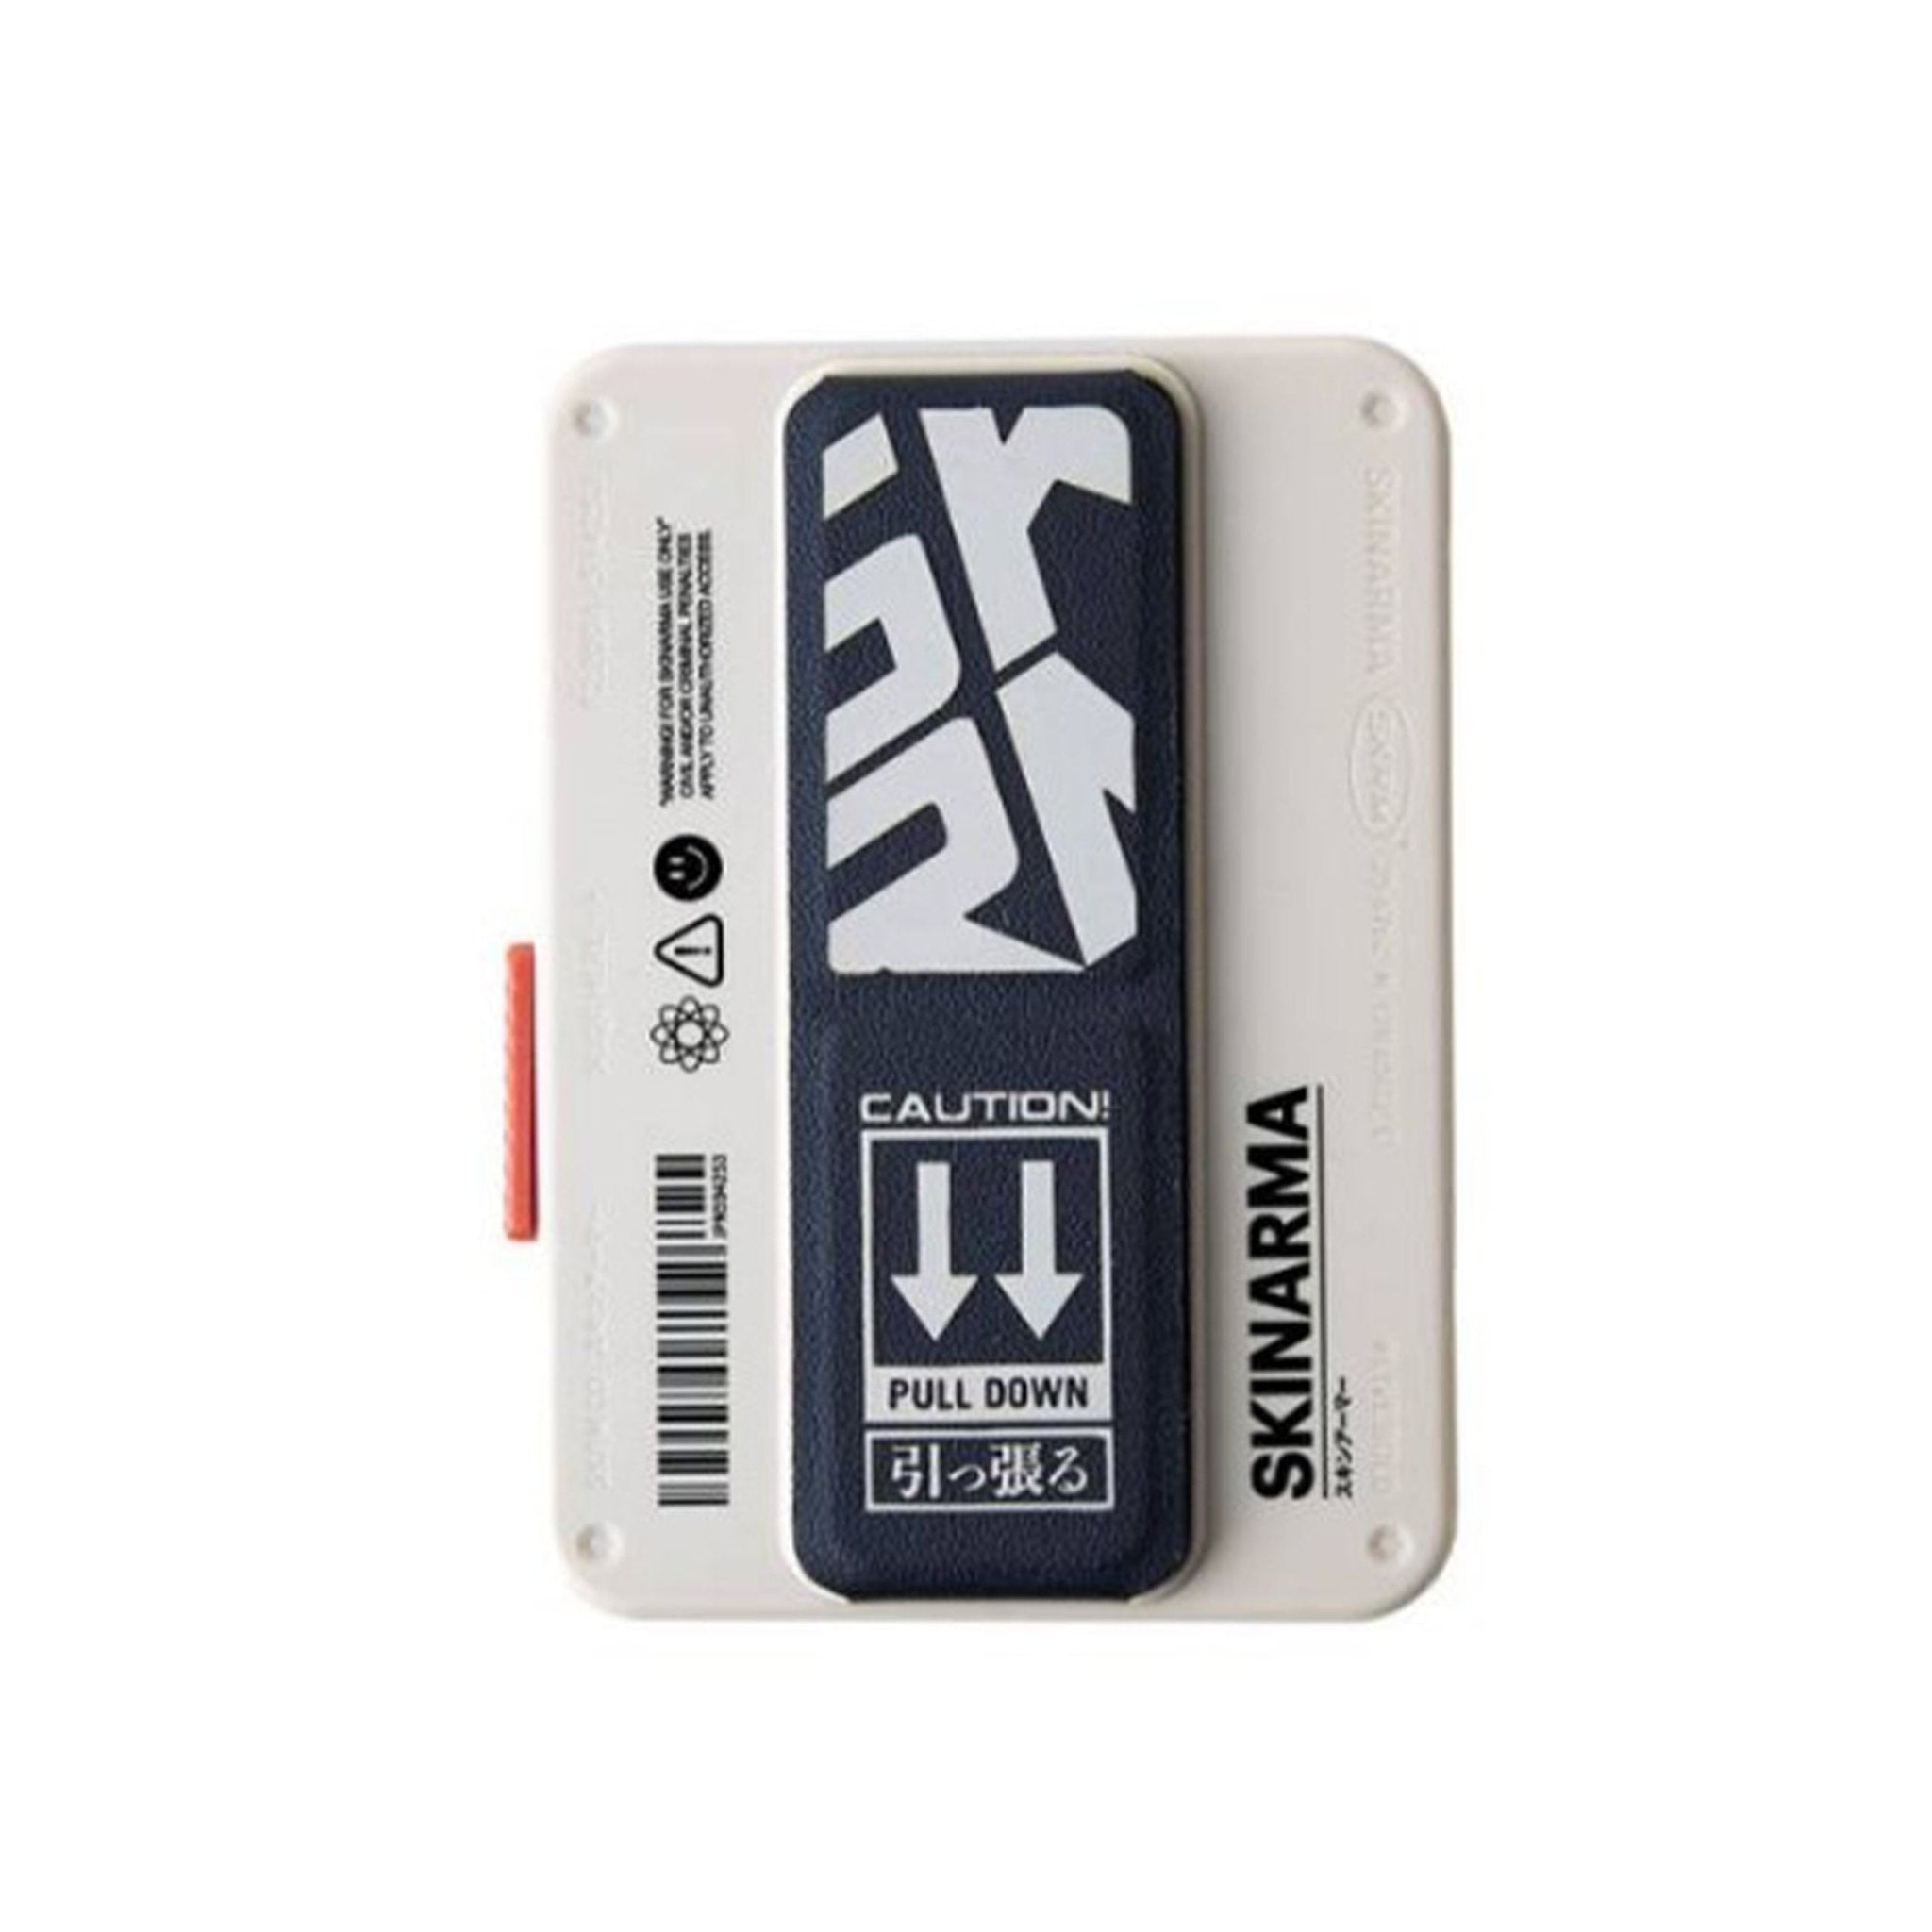 Skinarma Magnetic Cardholder Case with GripStand SPUNK - Cream